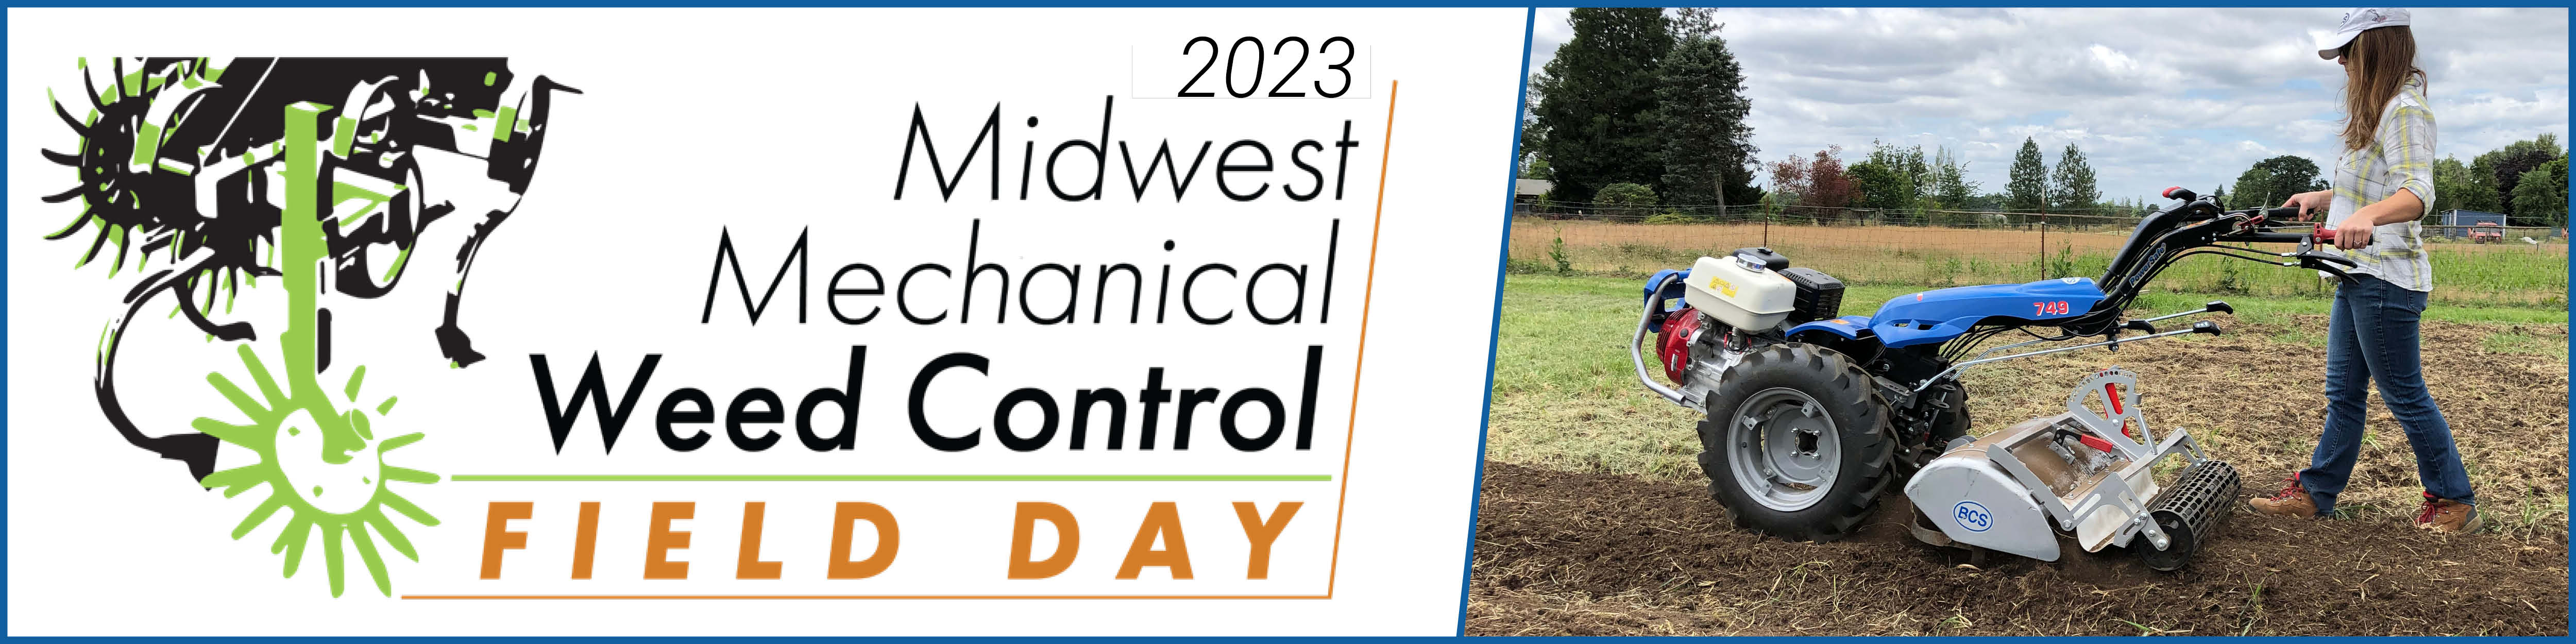 Midwest Mechanical Weed Control Field Day - Wooster, OH